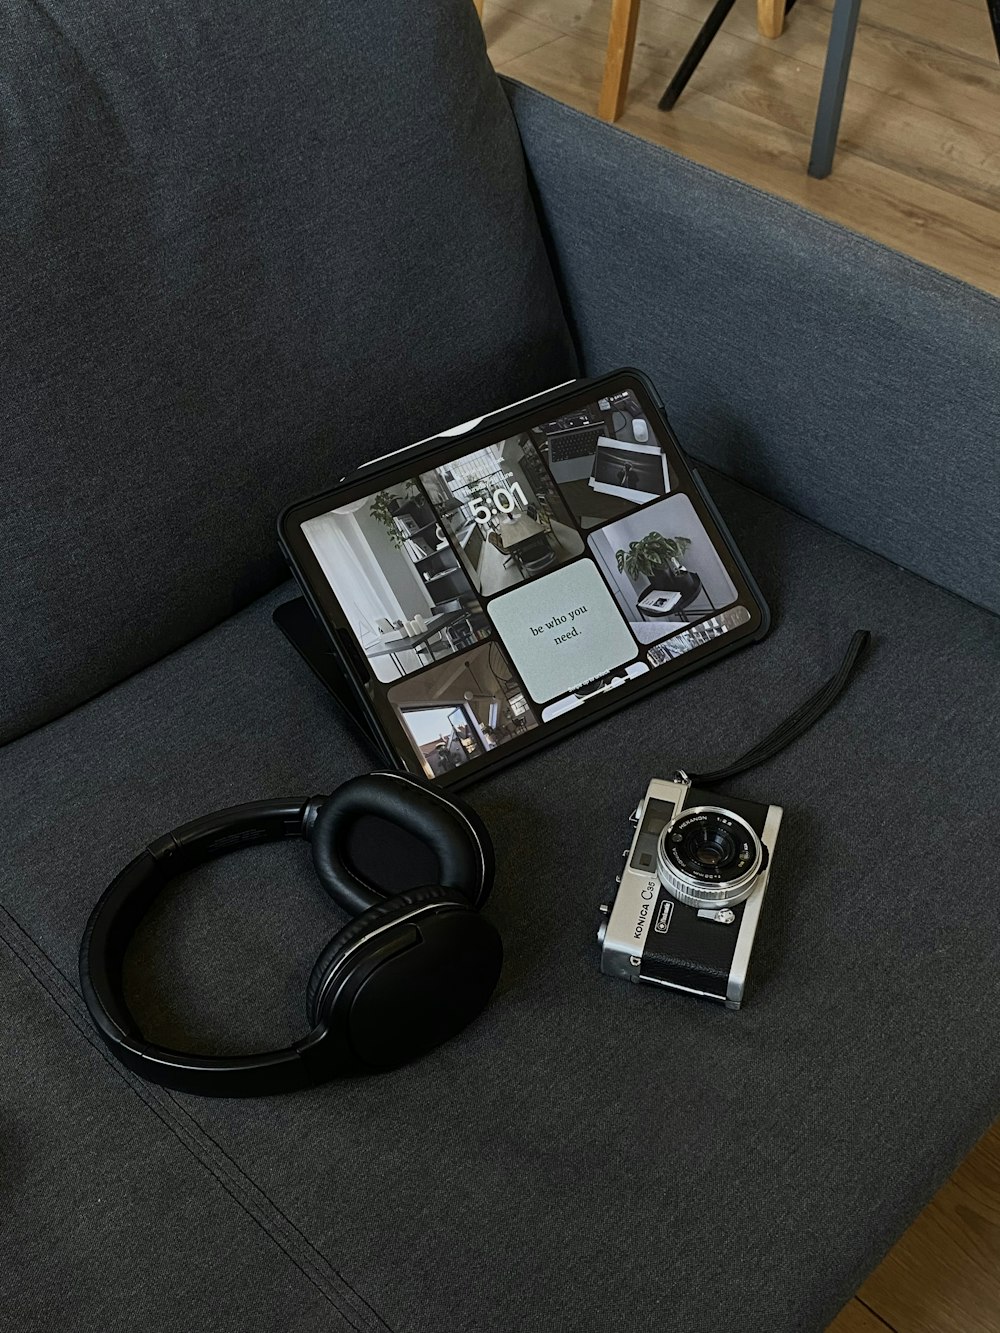 a camera, headphones, and a tablet on a couch